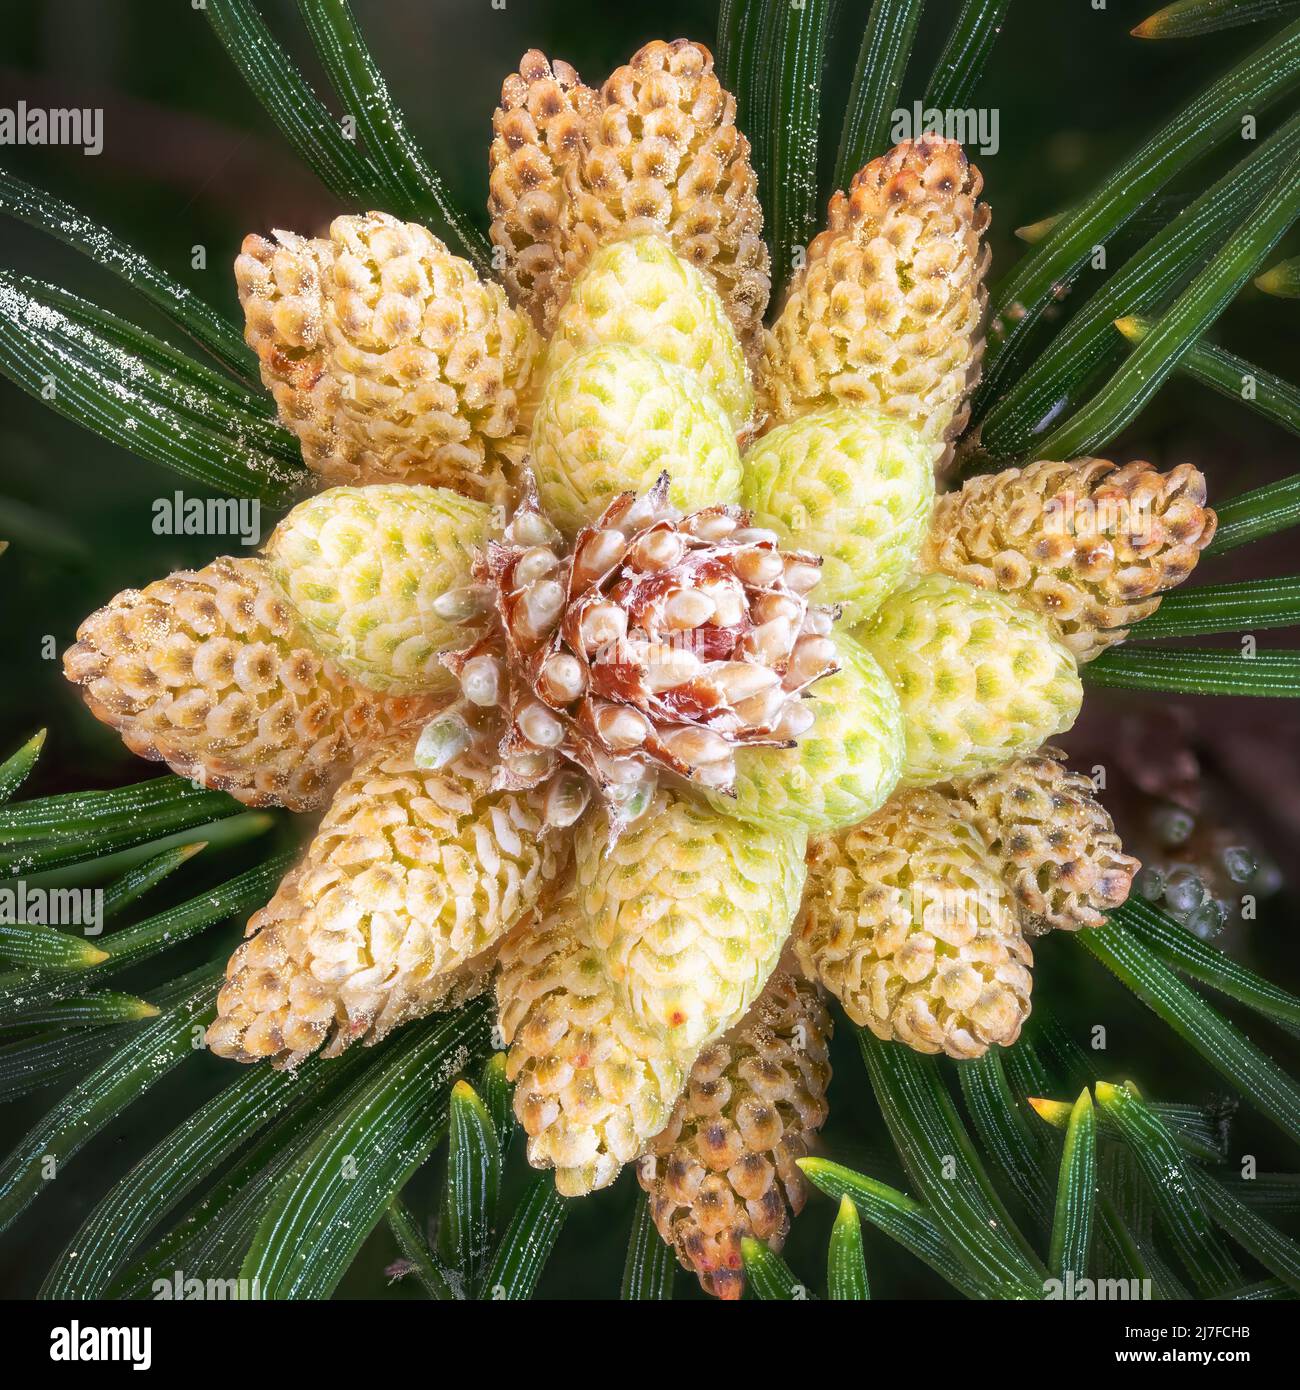 Detail of flowers of the dwarf pine with pollen and pine needles in spring Stock Photo